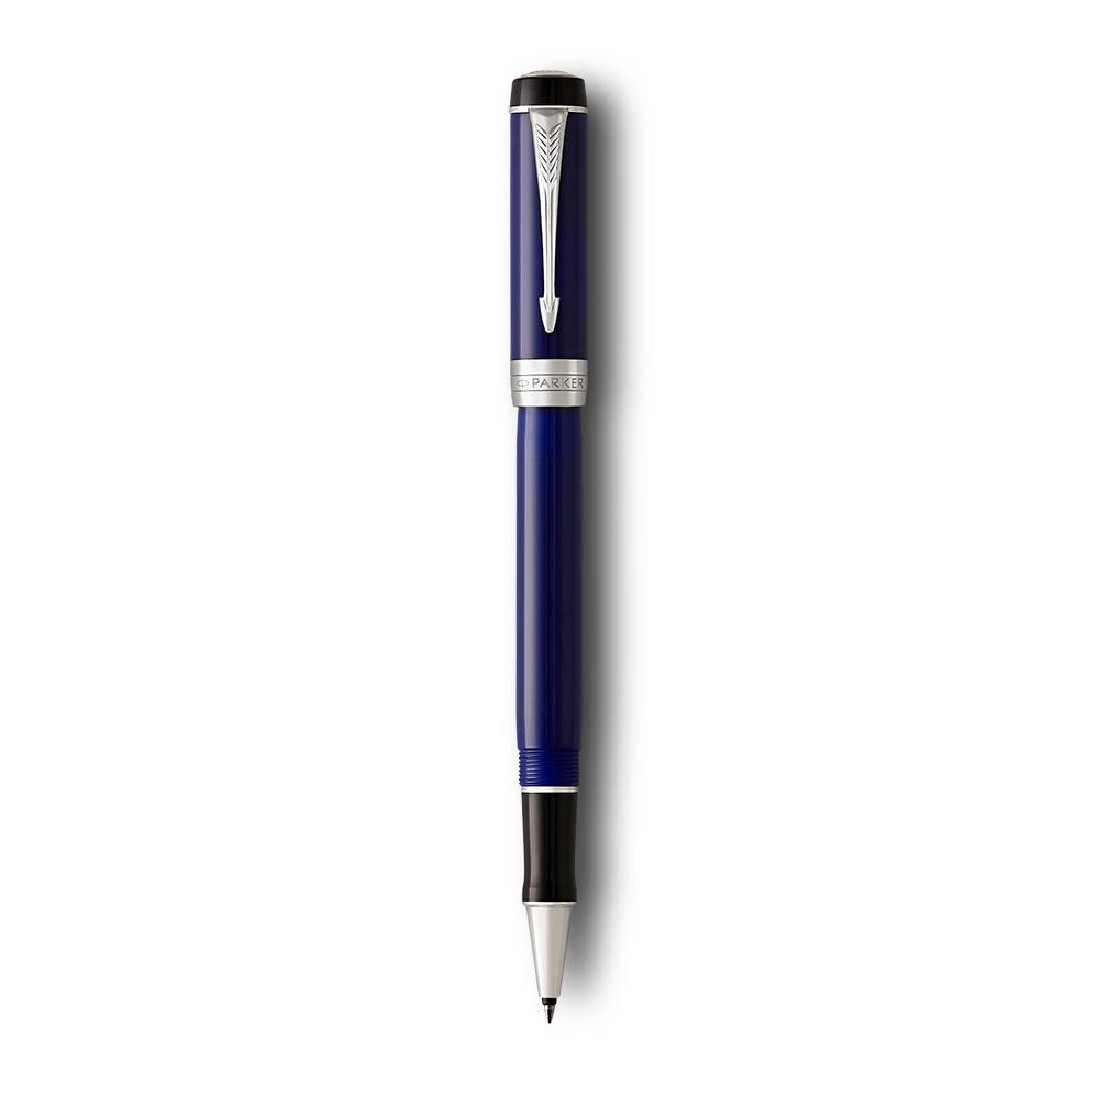 Parker Duofold International Fountain Pen, Classic Blue with Palladium Trim, Solid Gold Nib, Black Ink and Converter